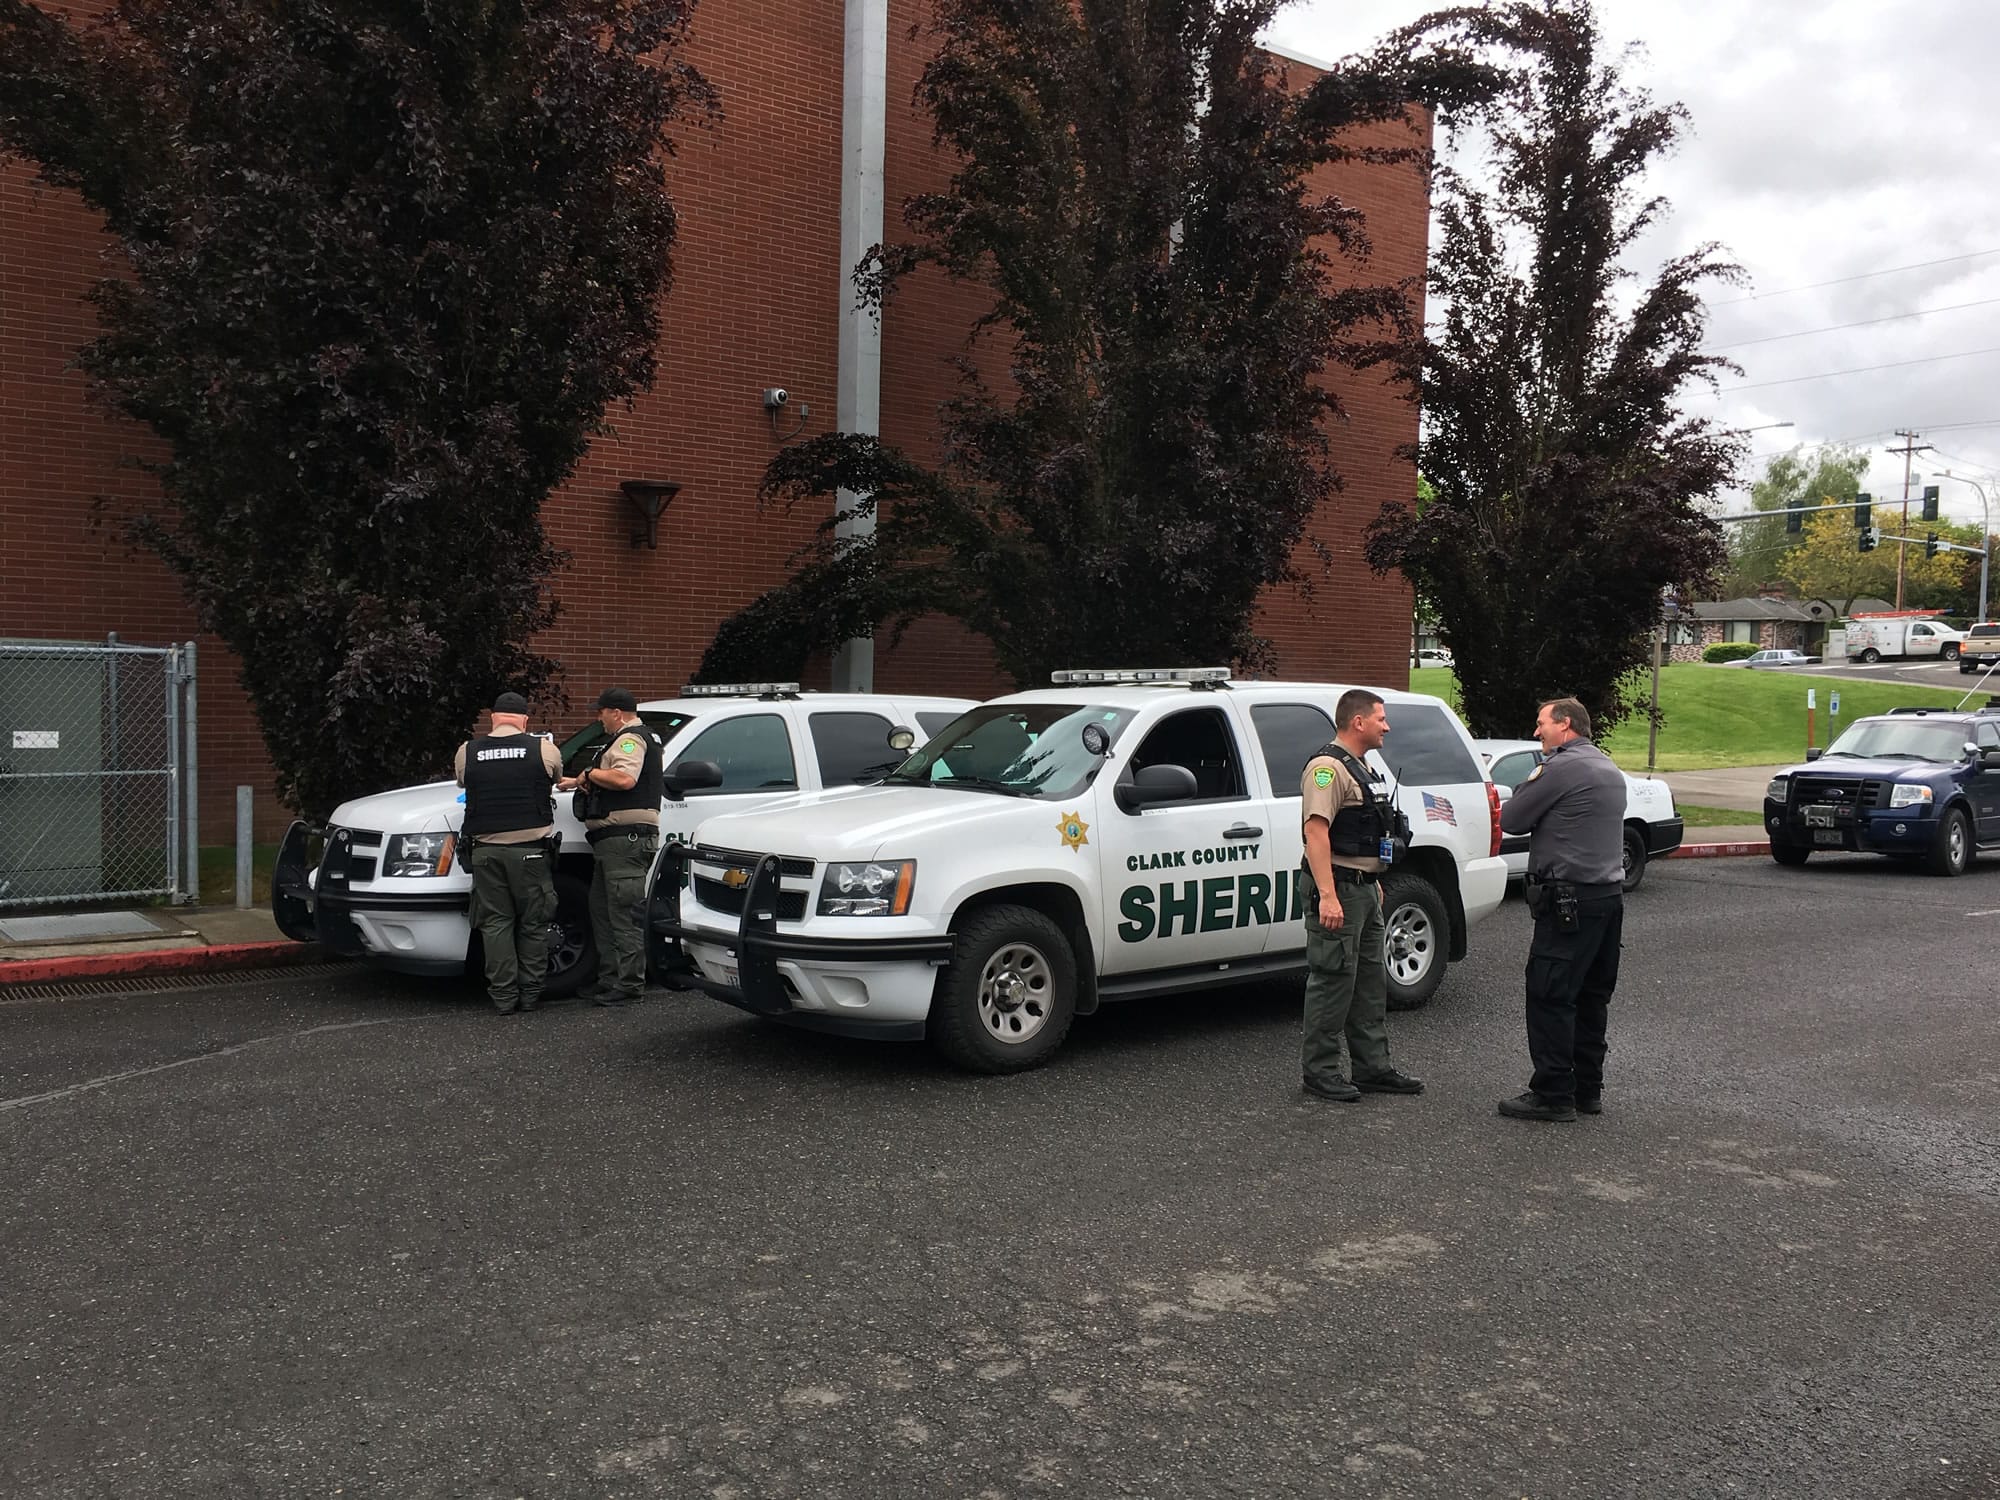 School district and Clark County Sheriff's Office personnel gather outside of Columbia River High school after detaining a transient man who walked inside the school unauthorized Wednesday morning, prompting a short lockdown at the school.